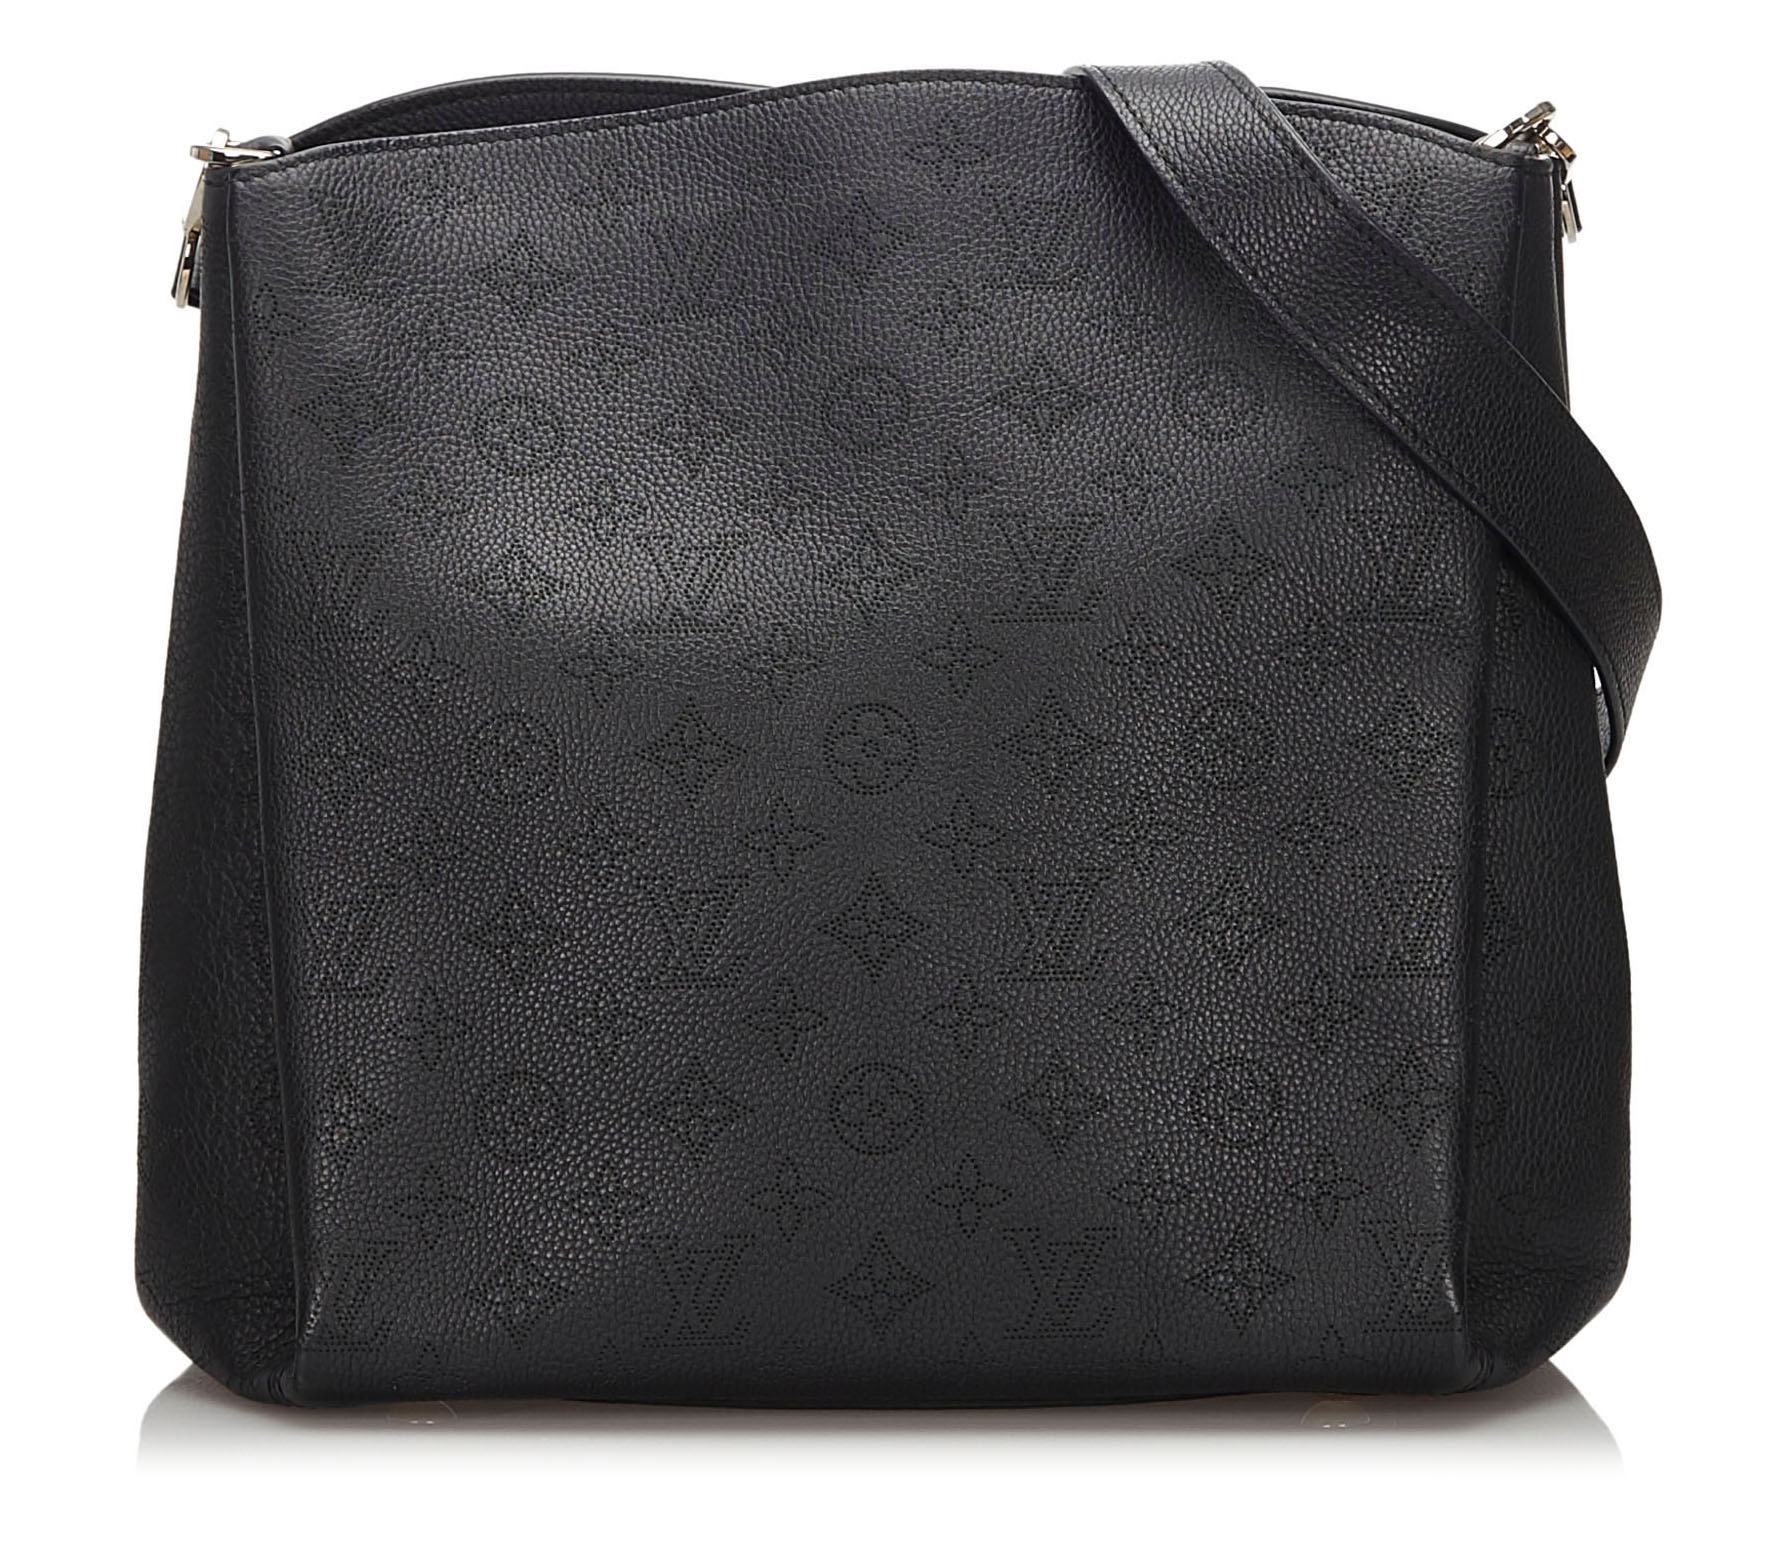 LV babylone PM mahina calf in black with Dustbag 37.0 x 31.0 x